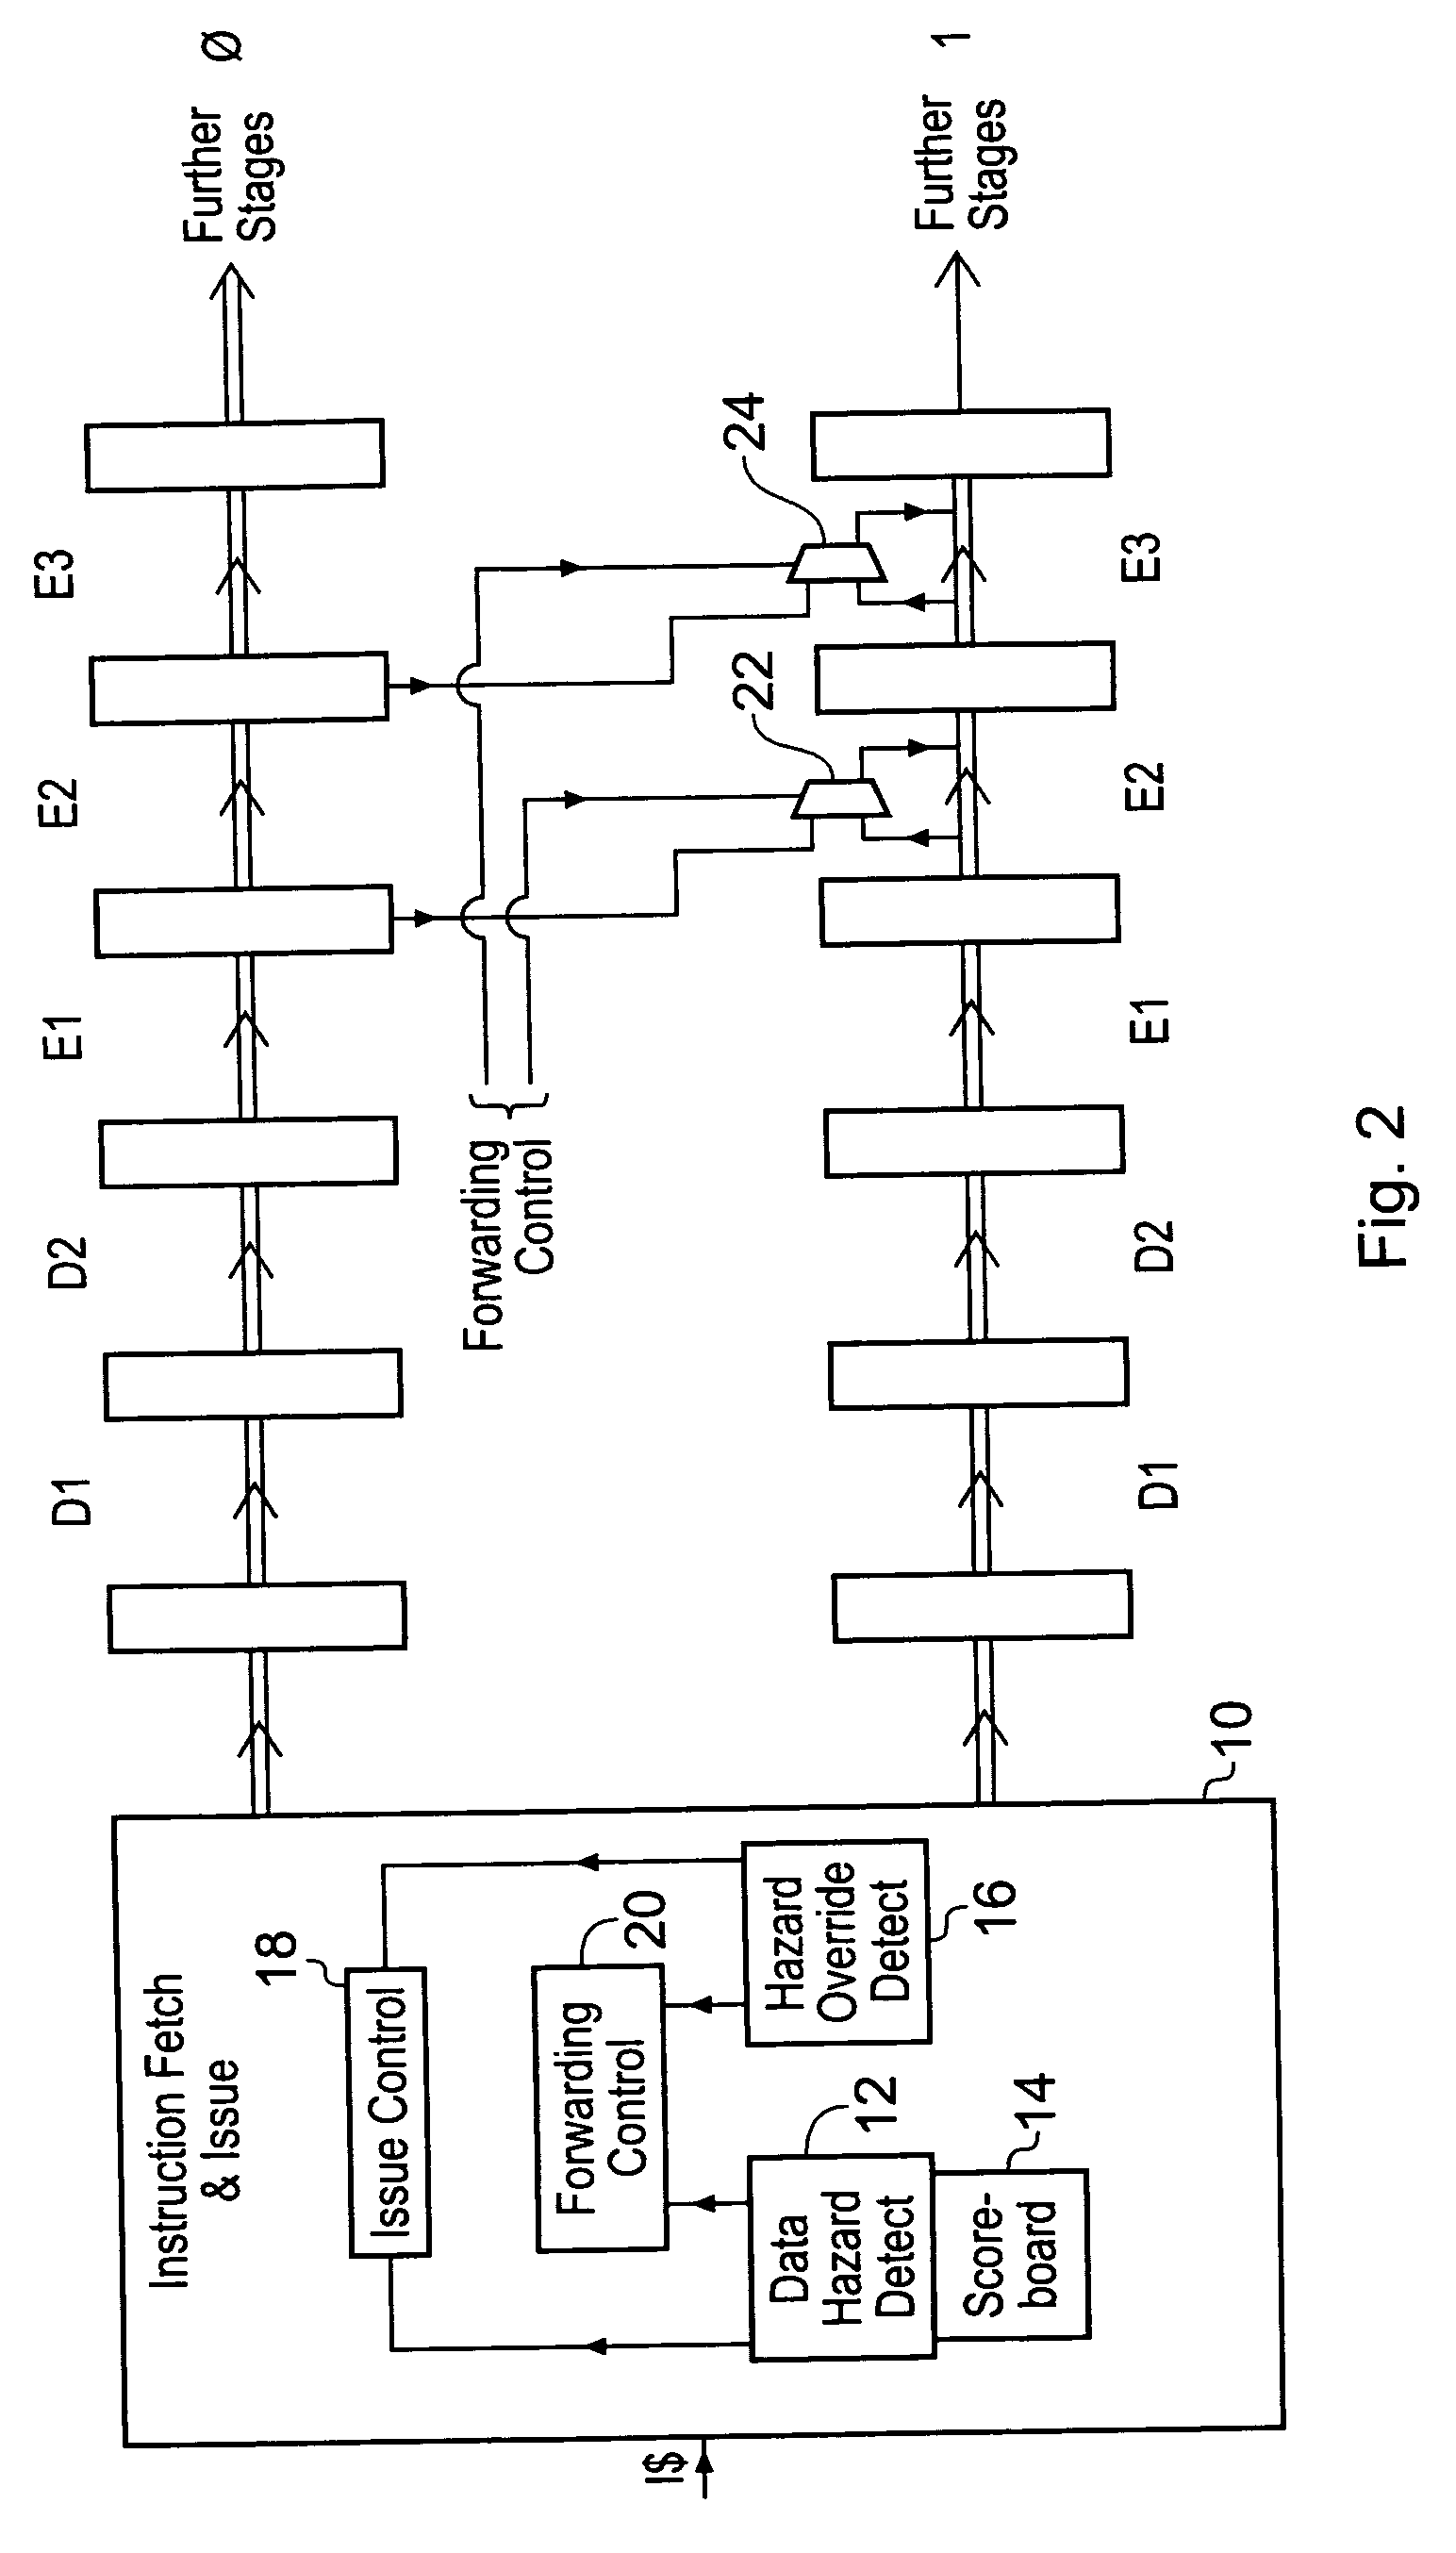 Instruction issue control within a superscalar processor